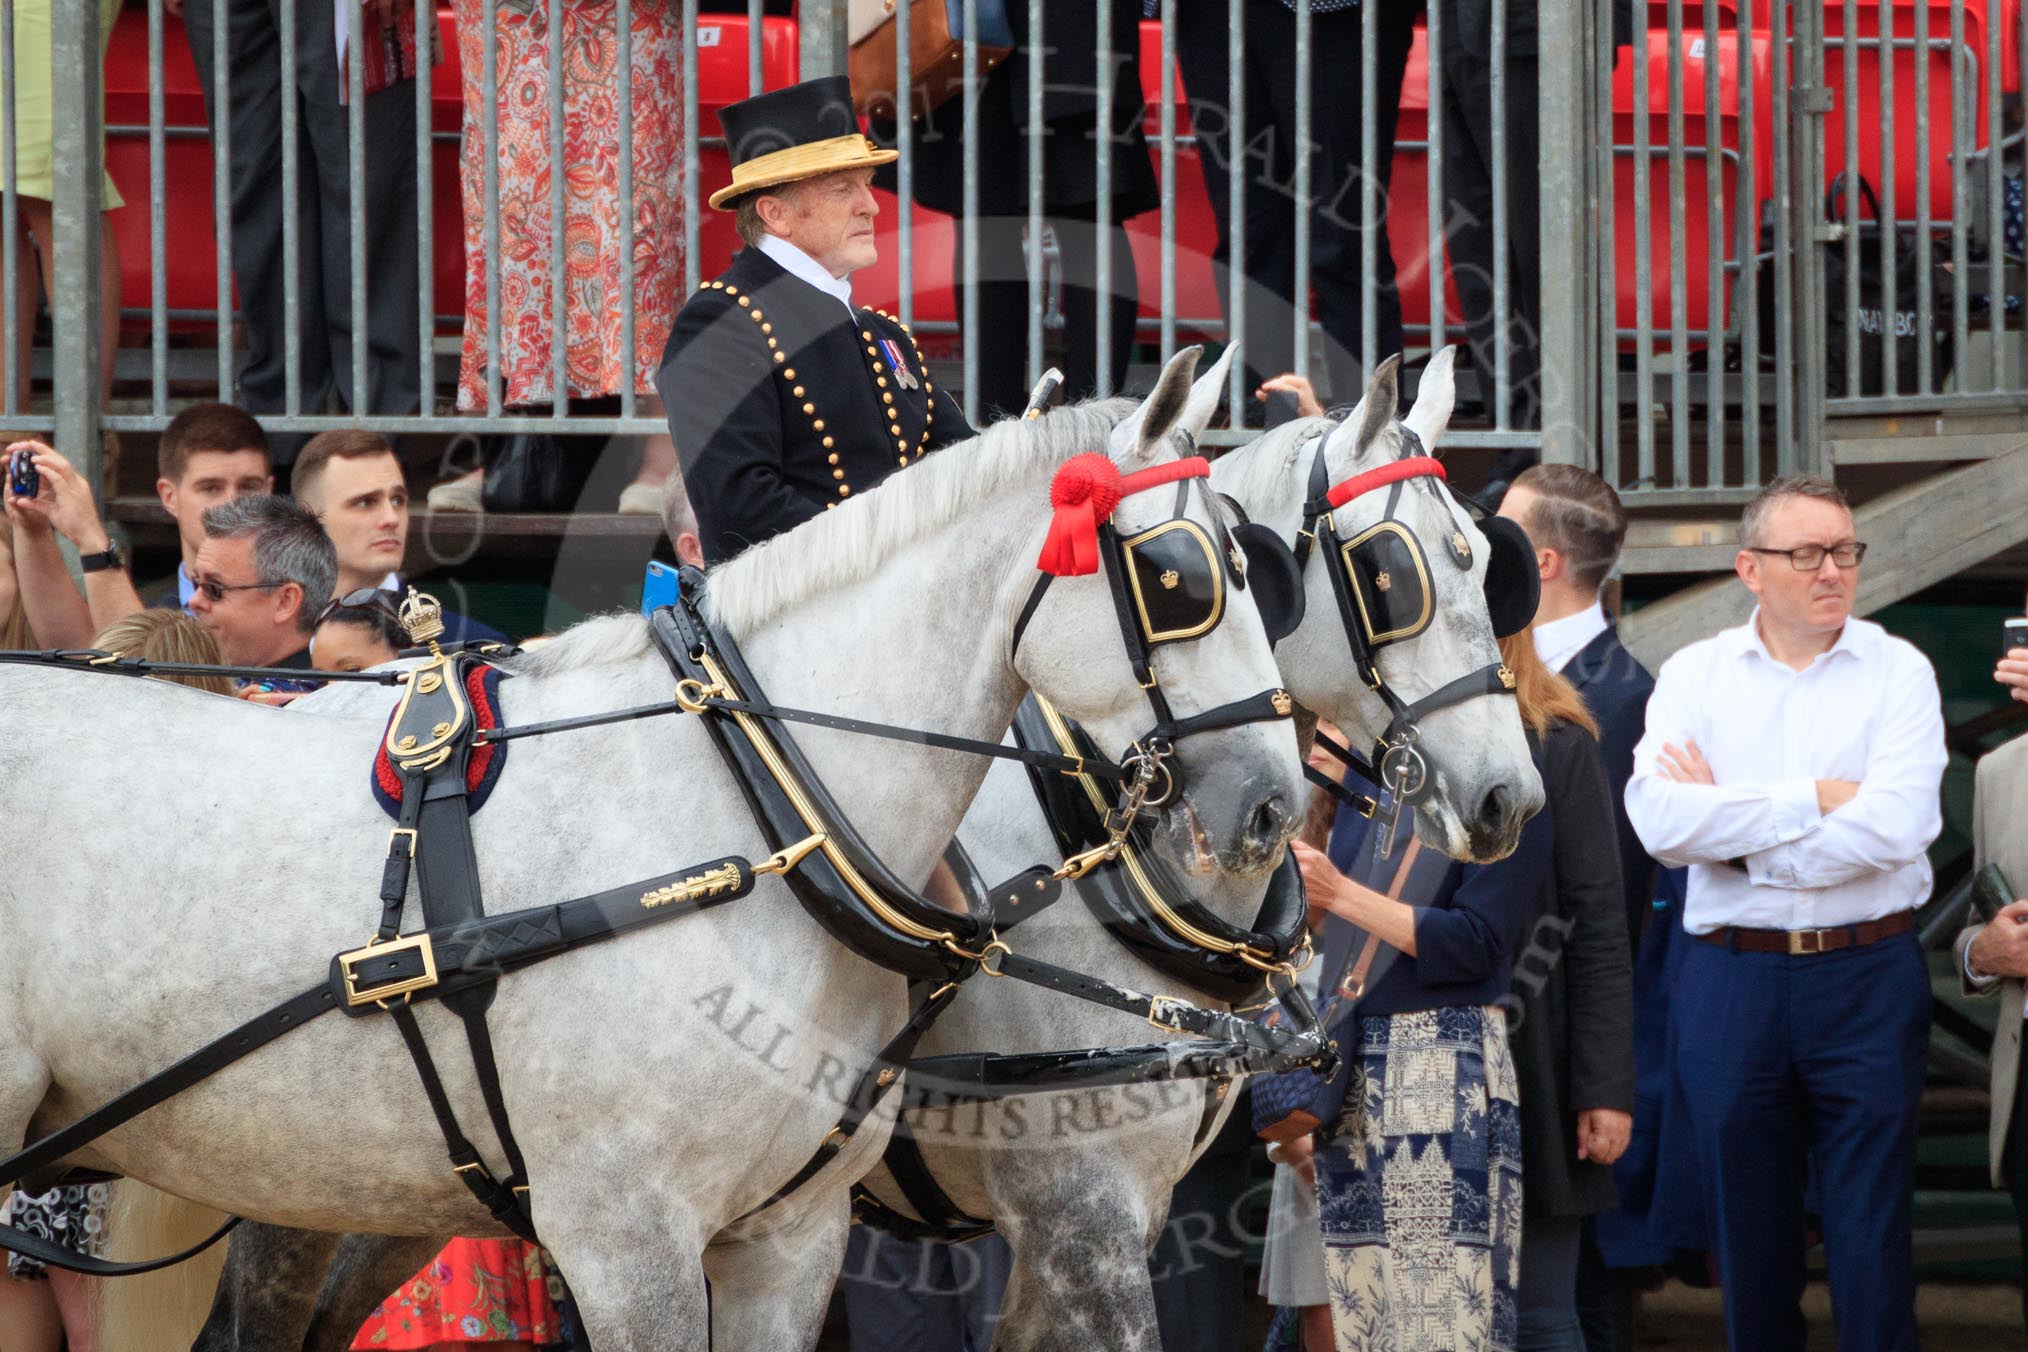 during The Colonel's Review {iptcyear4} (final rehearsal for Trooping the Colour, The Queen's Birthday Parade)  at Horse Guards Parade, Westminster, London, 2 June 2018, 10:59.